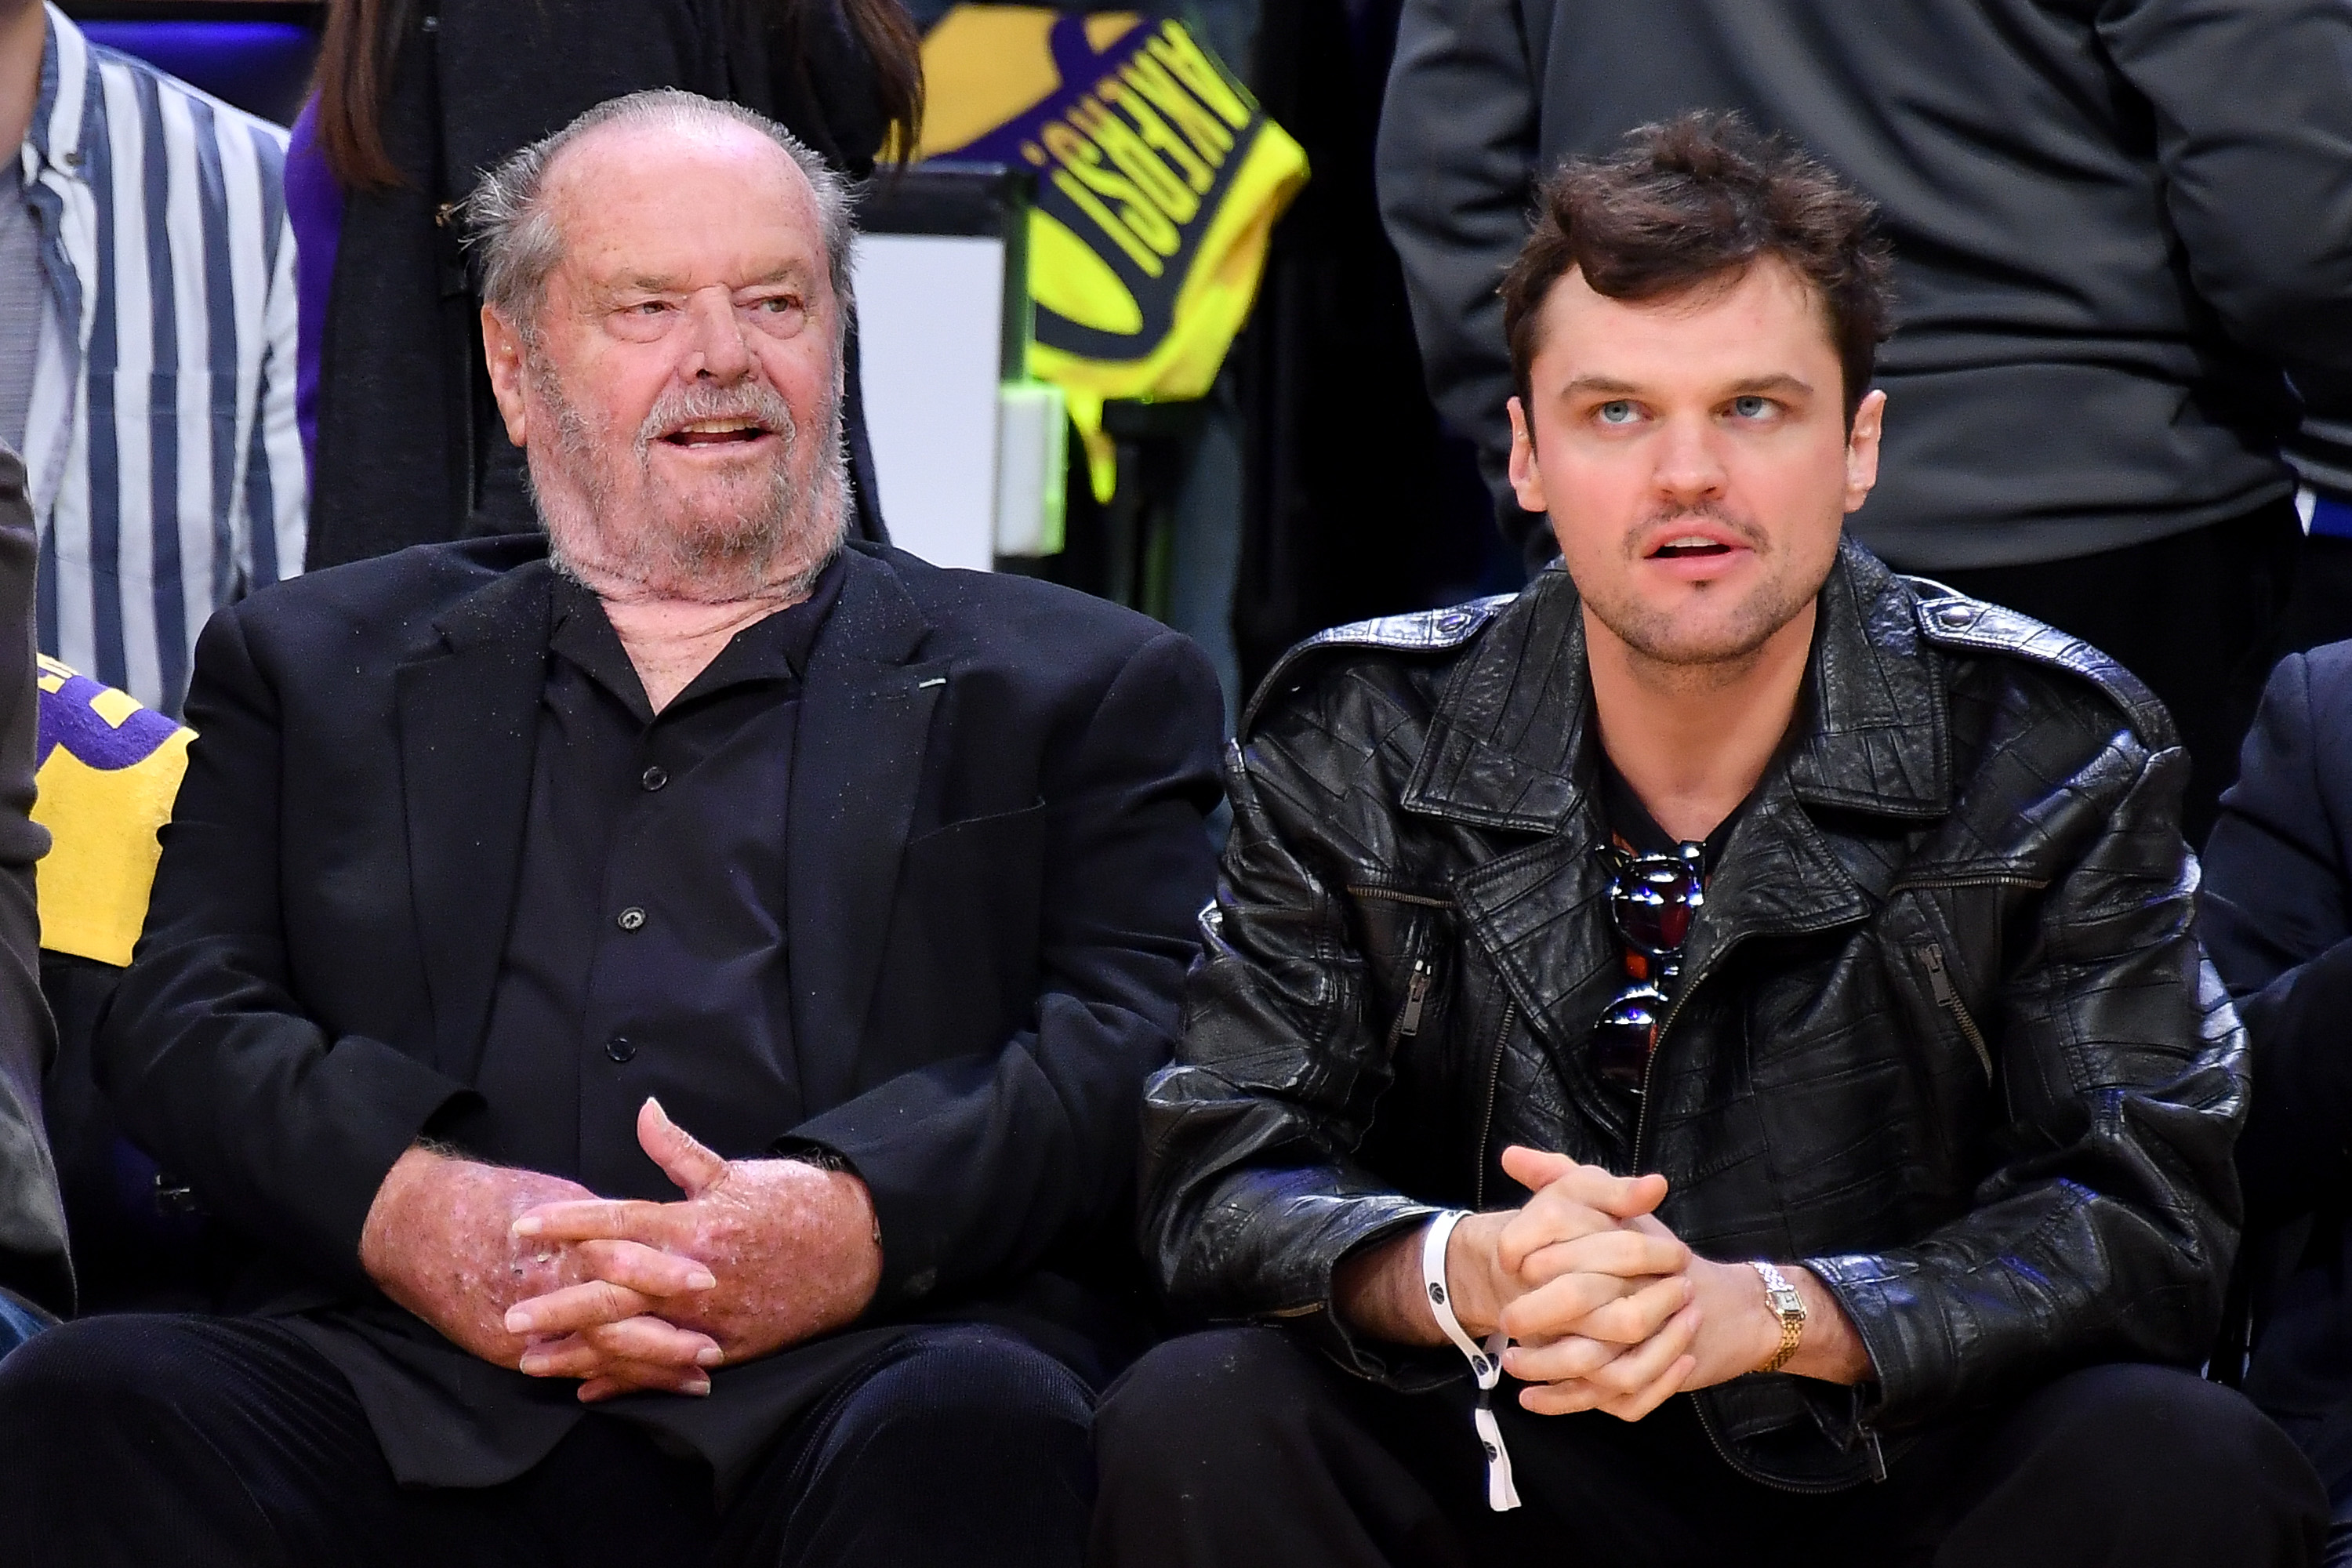 Jack Nicholson and Ray Nicholson at a playoff basketball game between the Los Angeles Lakers and the Golden State Warriors in Los Angeles, California on May 08, 2023 | Source: Getty Images